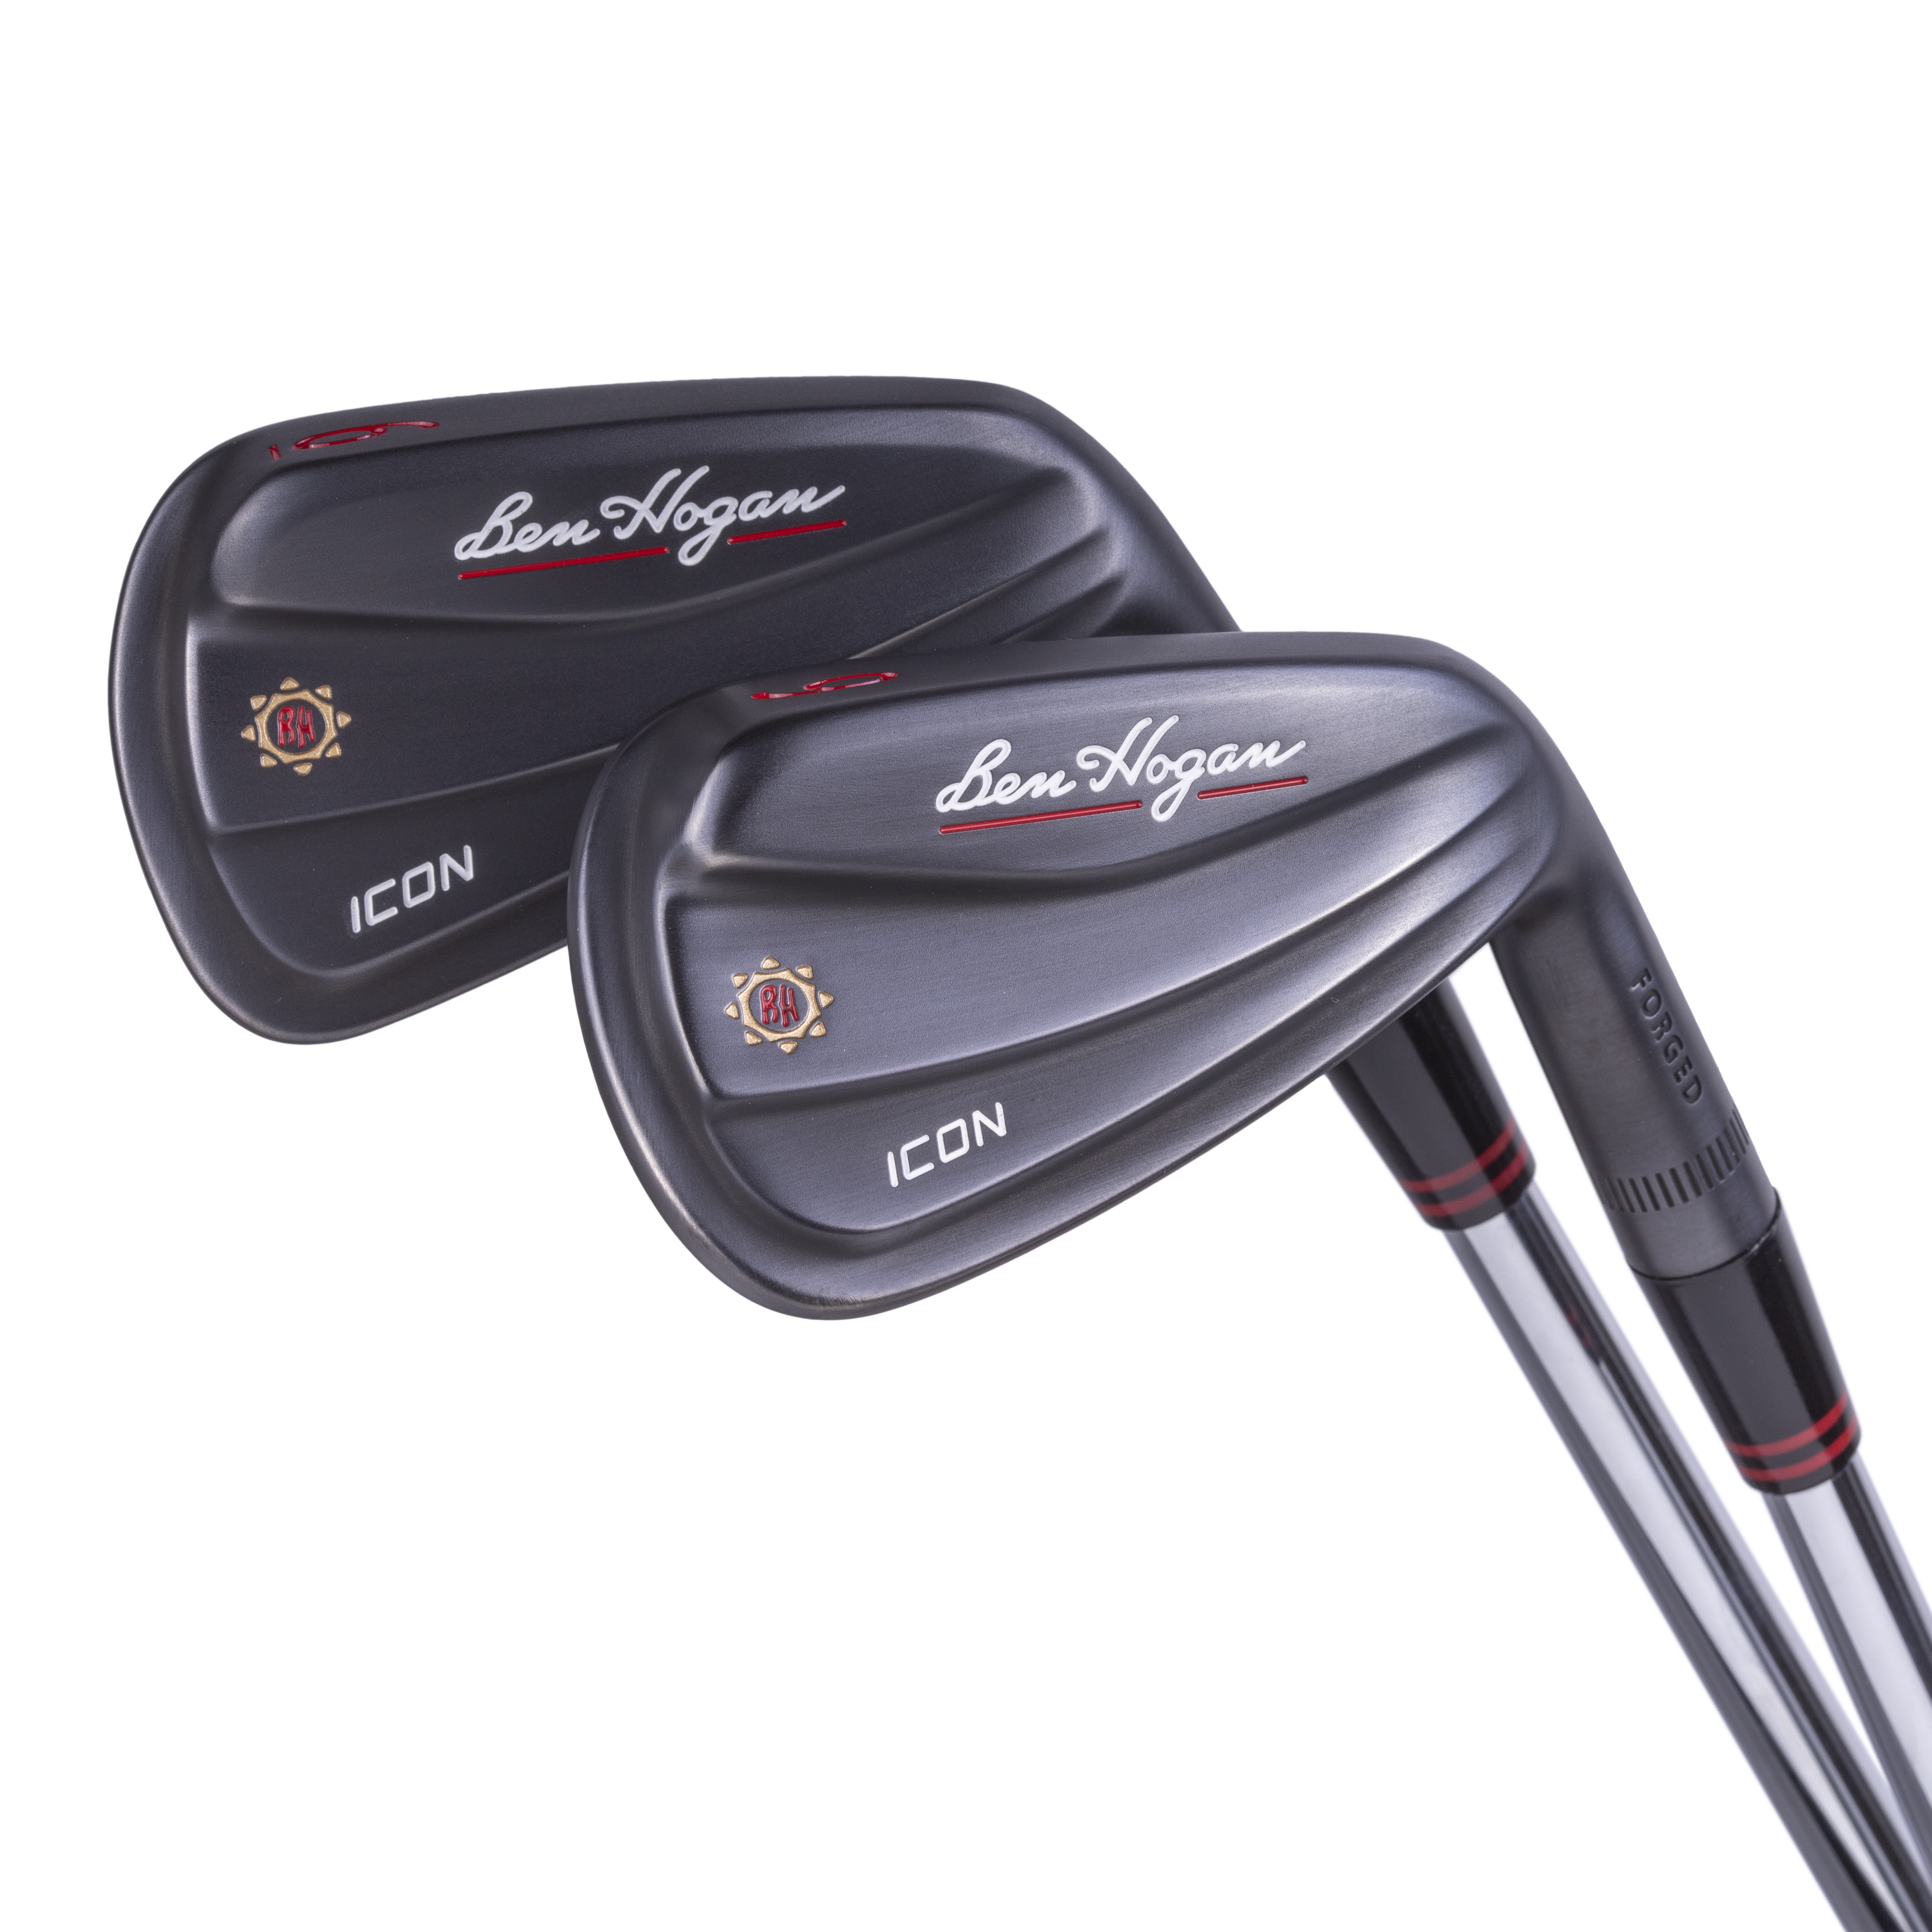 Black | Muscle Irons | Golf Clubs for Sale